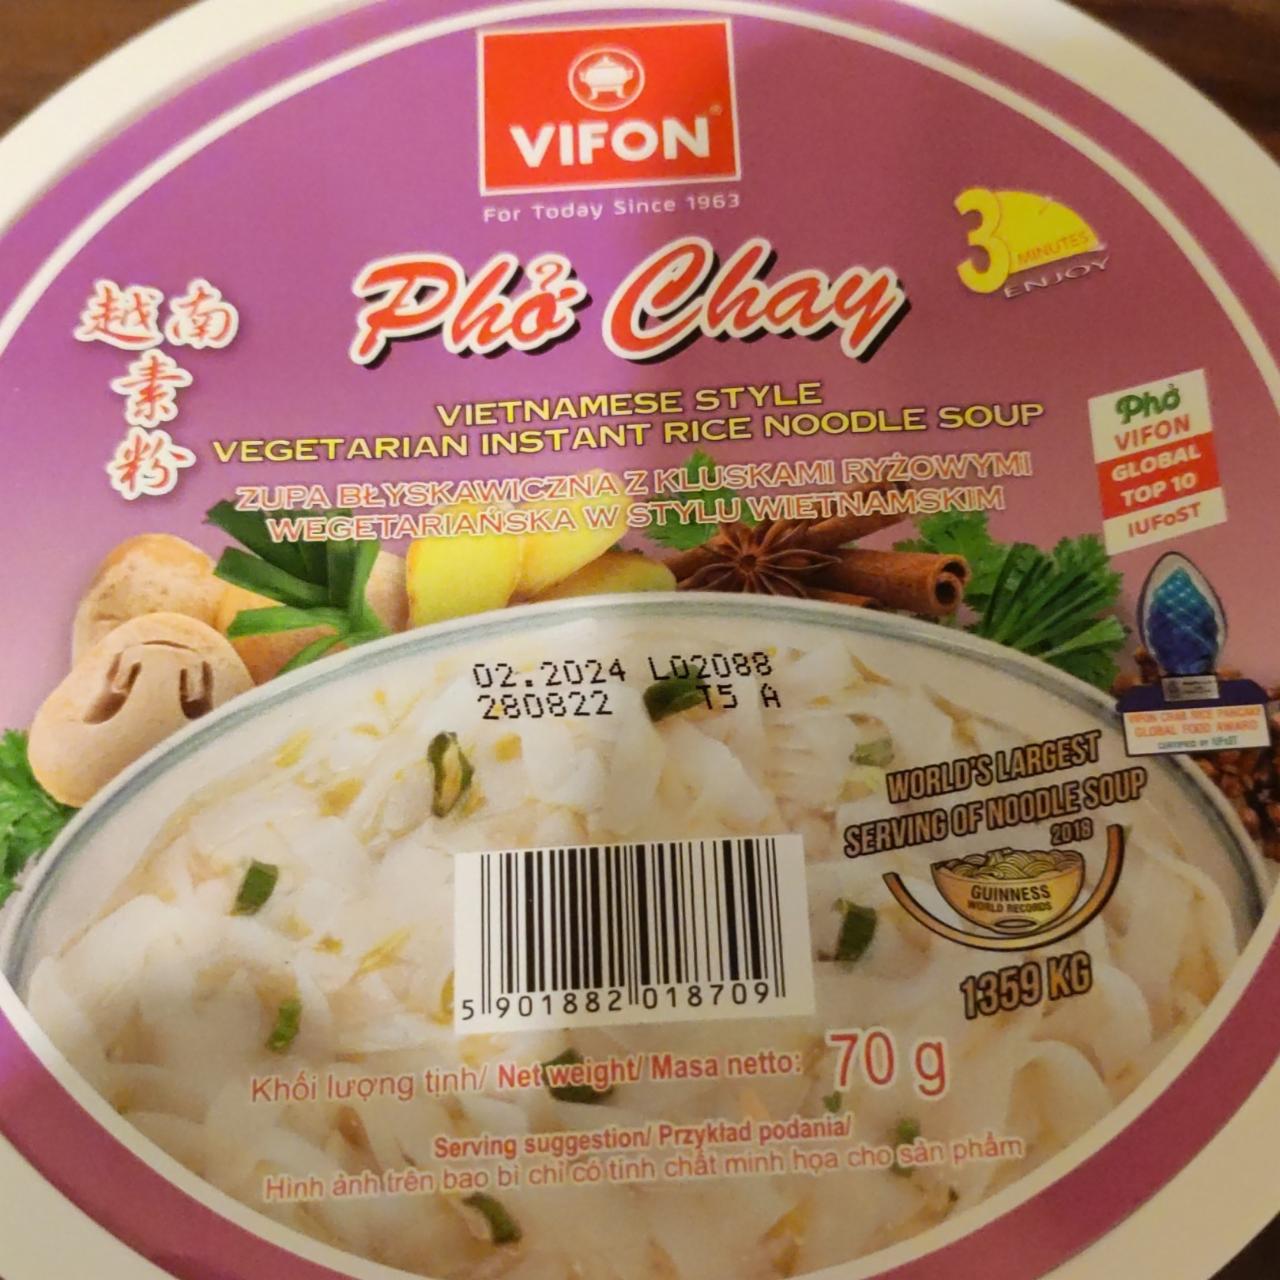 Фото - Pho Chay Vietnamese Style Vegetarian Instant Rice Noodle Soup Vifon